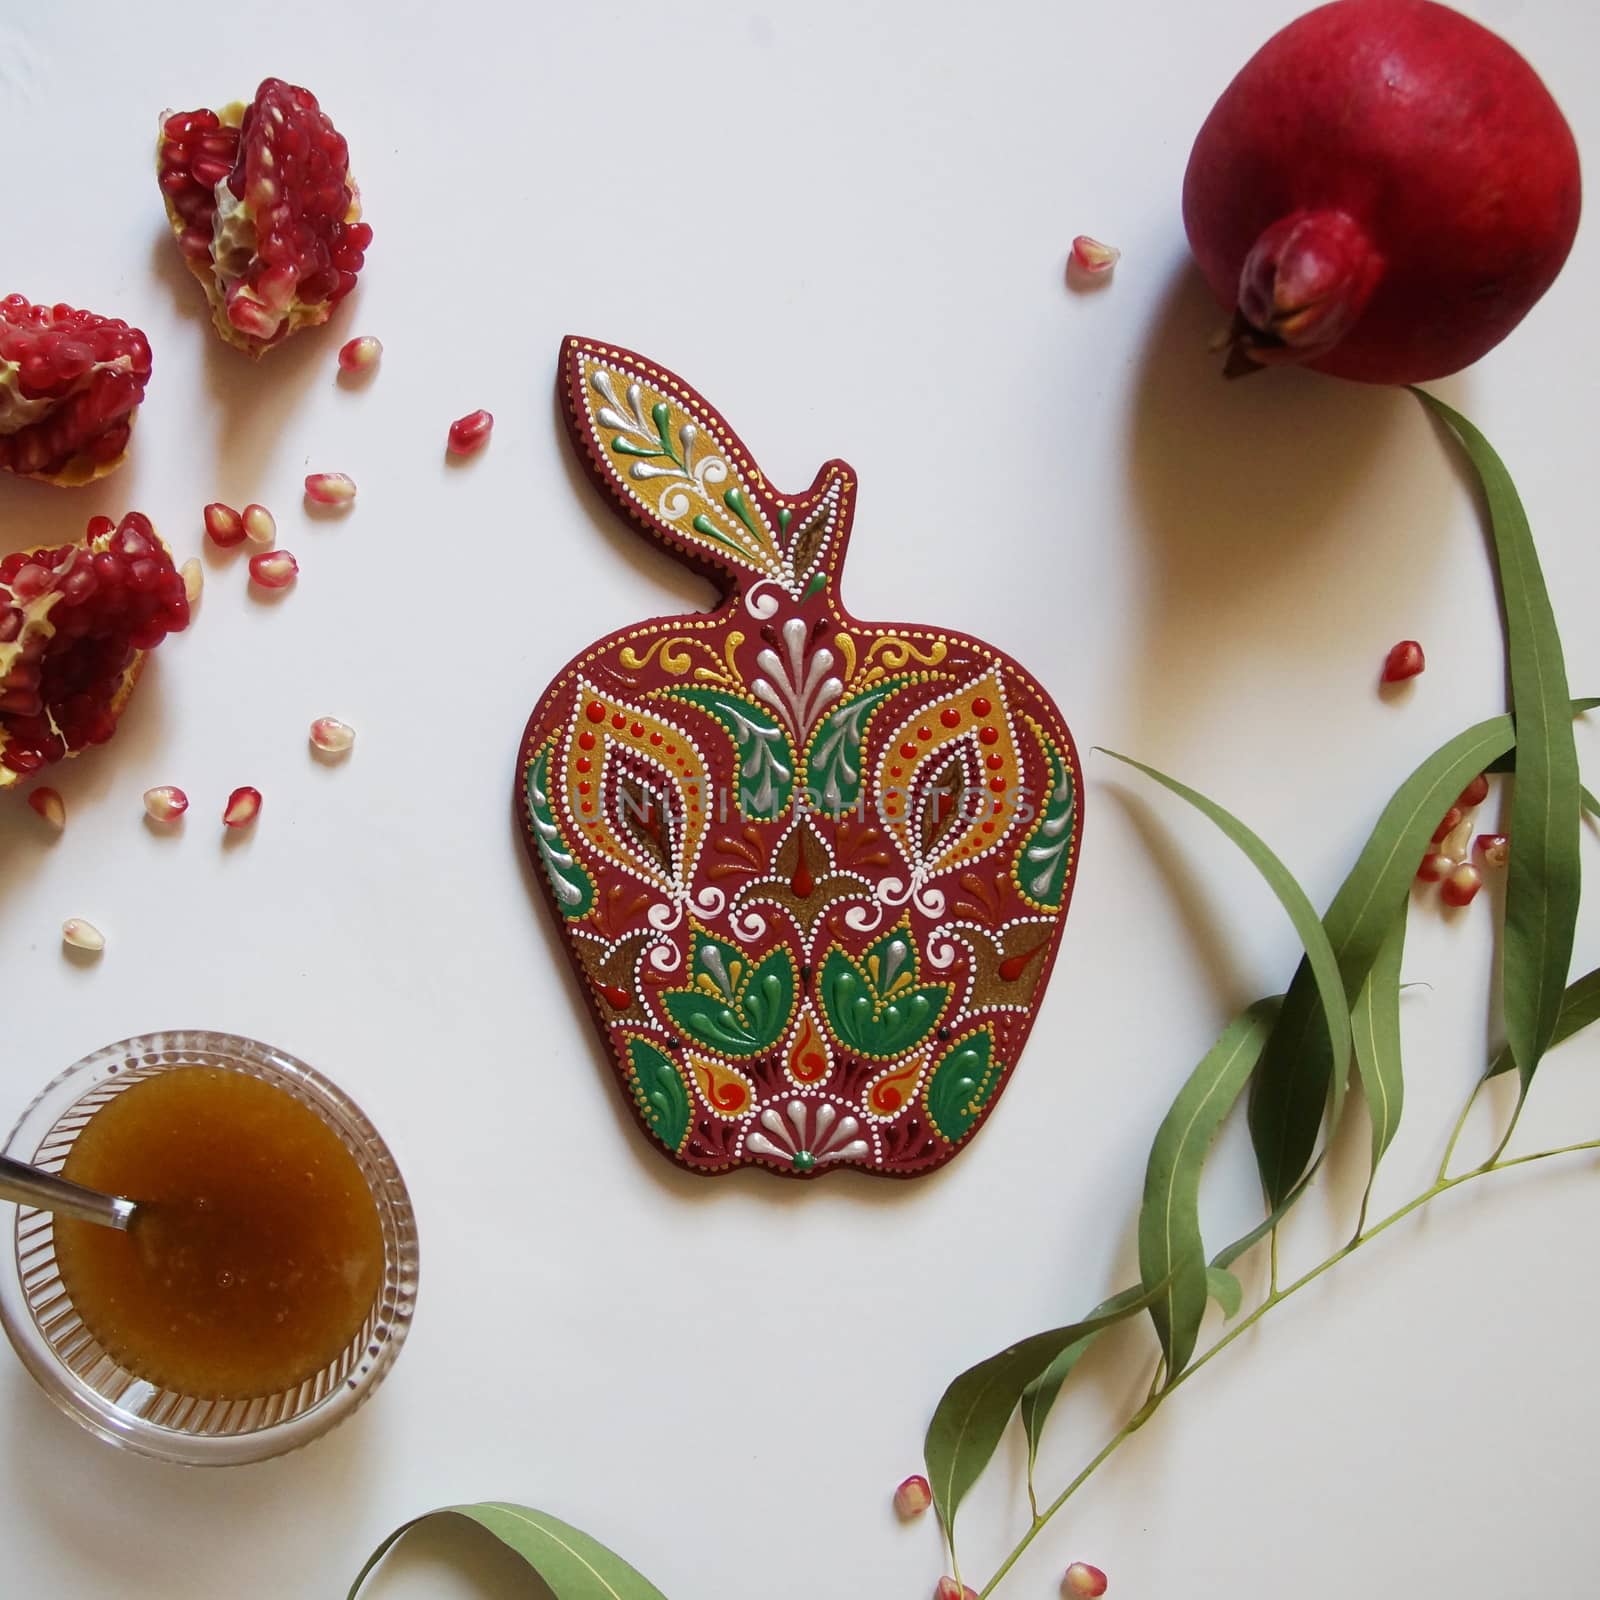 Rosh Hashanah Concept (Jewish New Year). Traditional symbols - pomegranate, honey and handmade apple, made from wood, painted with acrylic colors. Top view